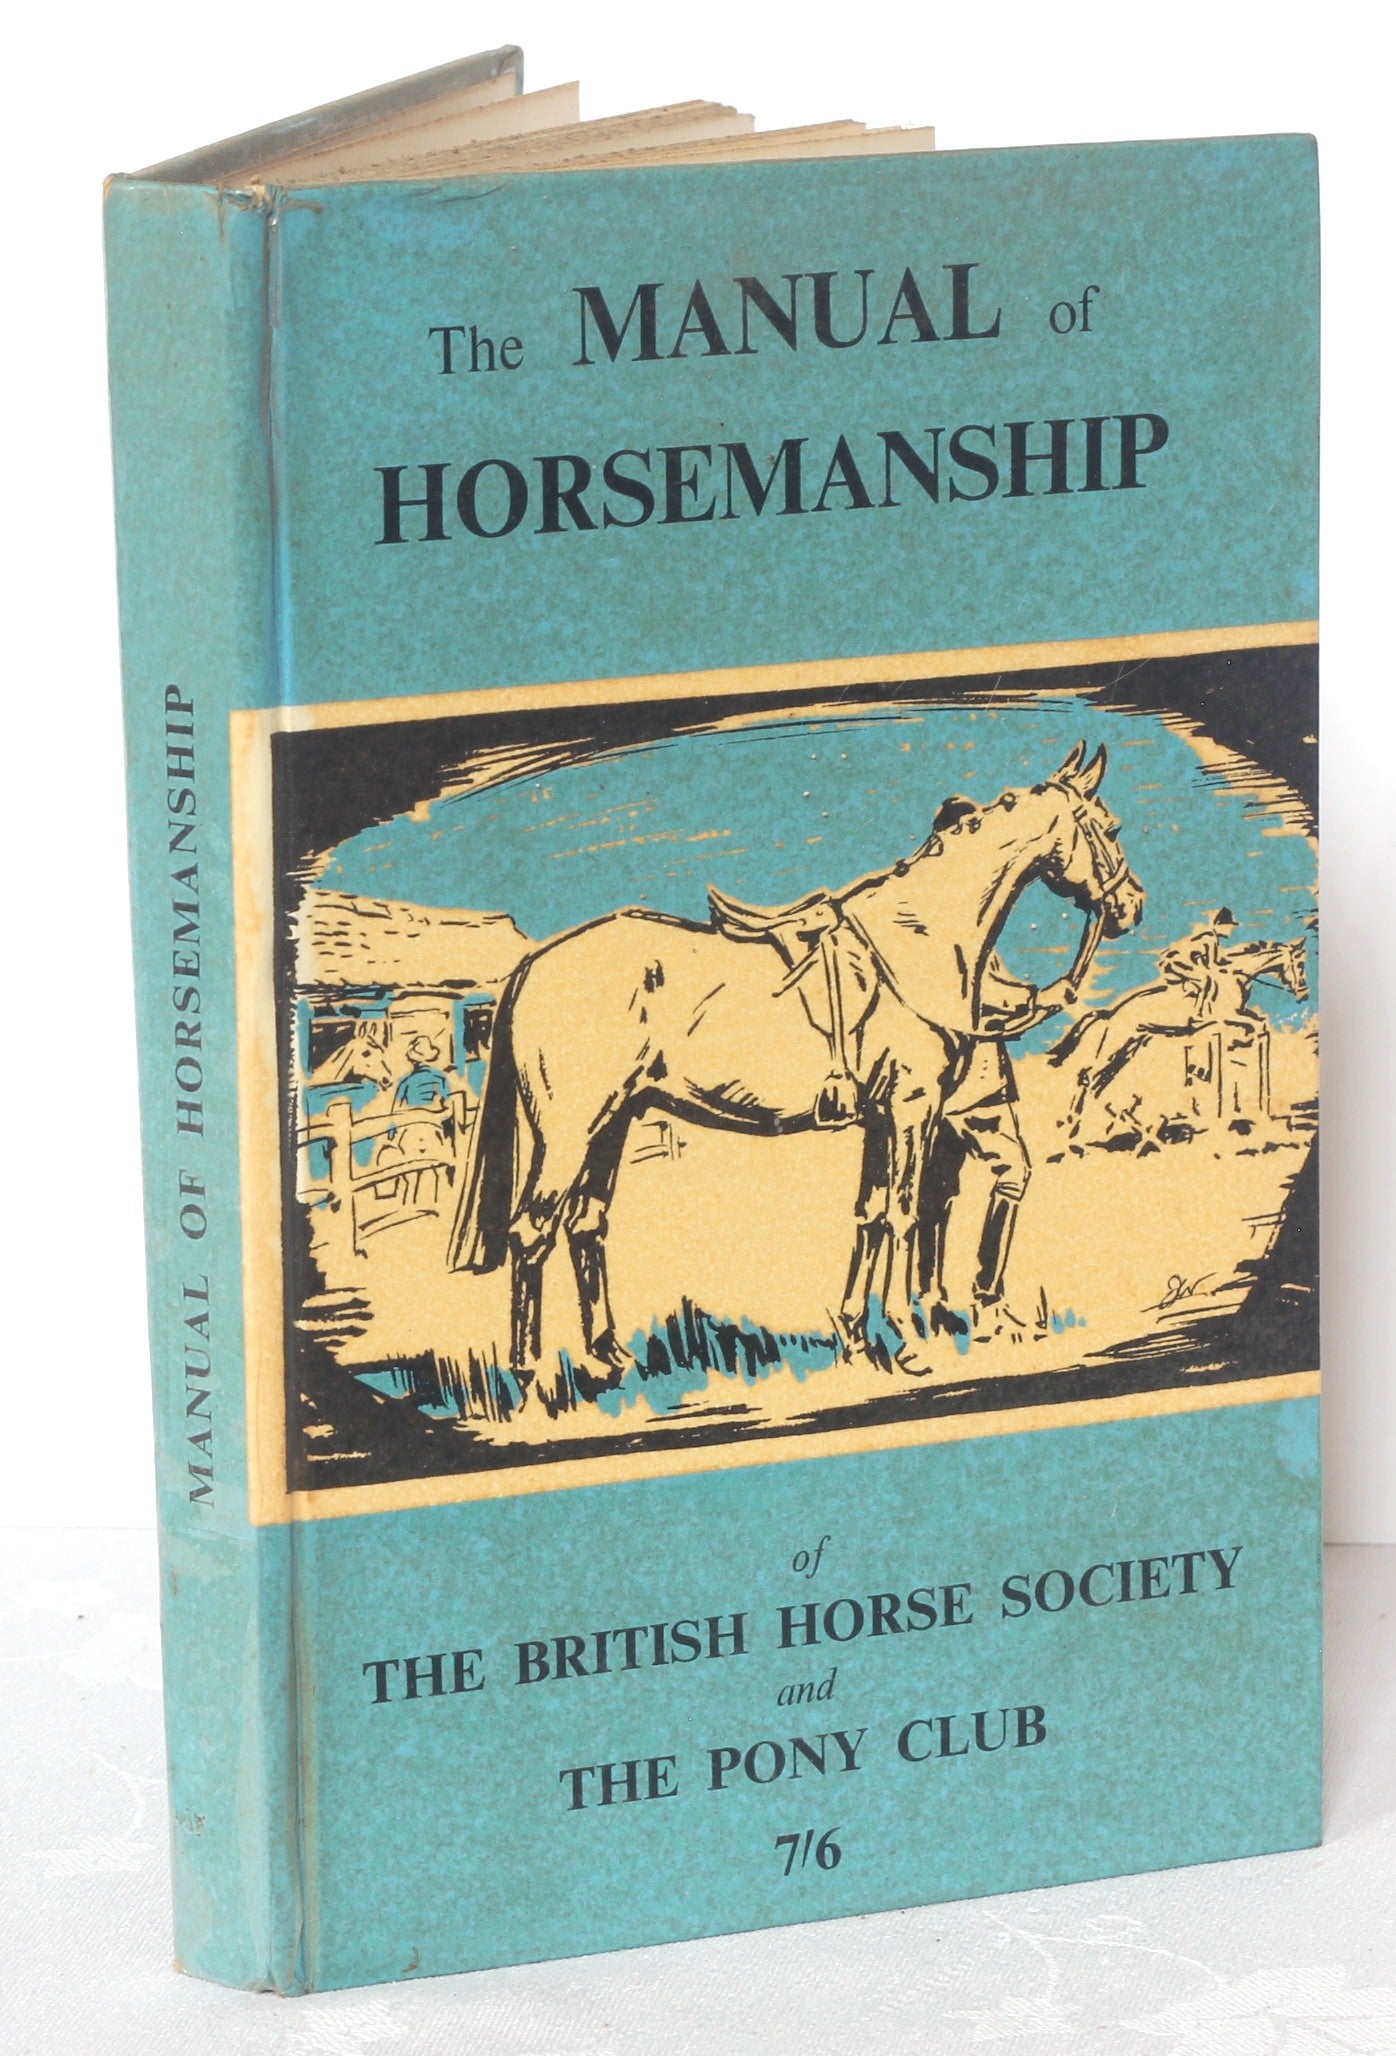 The Manual of Horsemanship of the BHS and the Pony Club, 5th Ed 1962